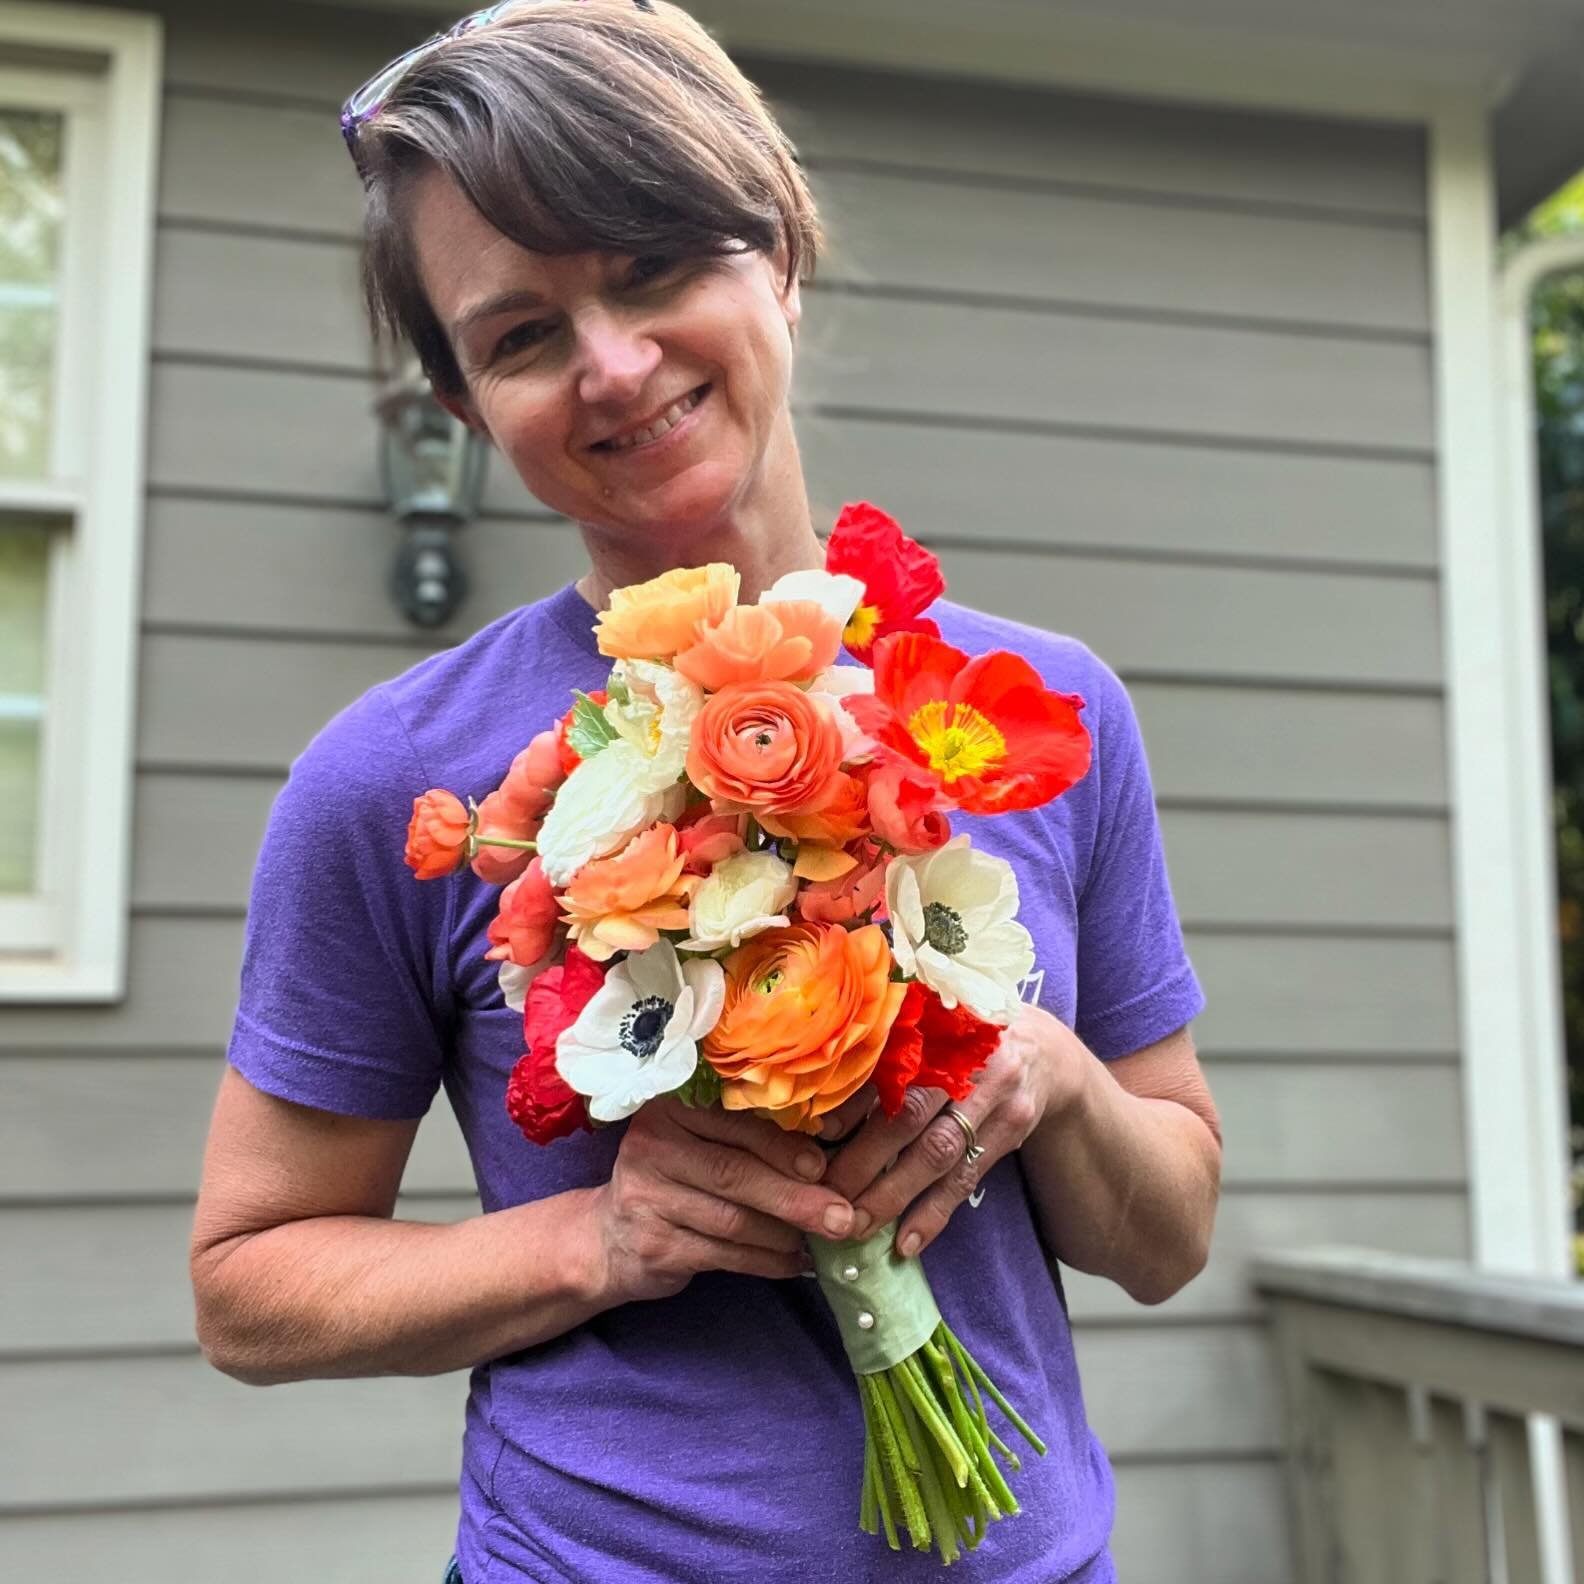 Surprise! In case you didn&rsquo;t get flowers this weekend, these are for you. 💐 Put them on your desk this week and know someone is thinking of you. 😀

Bouquet subscriptions are nearly sold out. Only 1 left for farm pick up, I think. Subscribers,